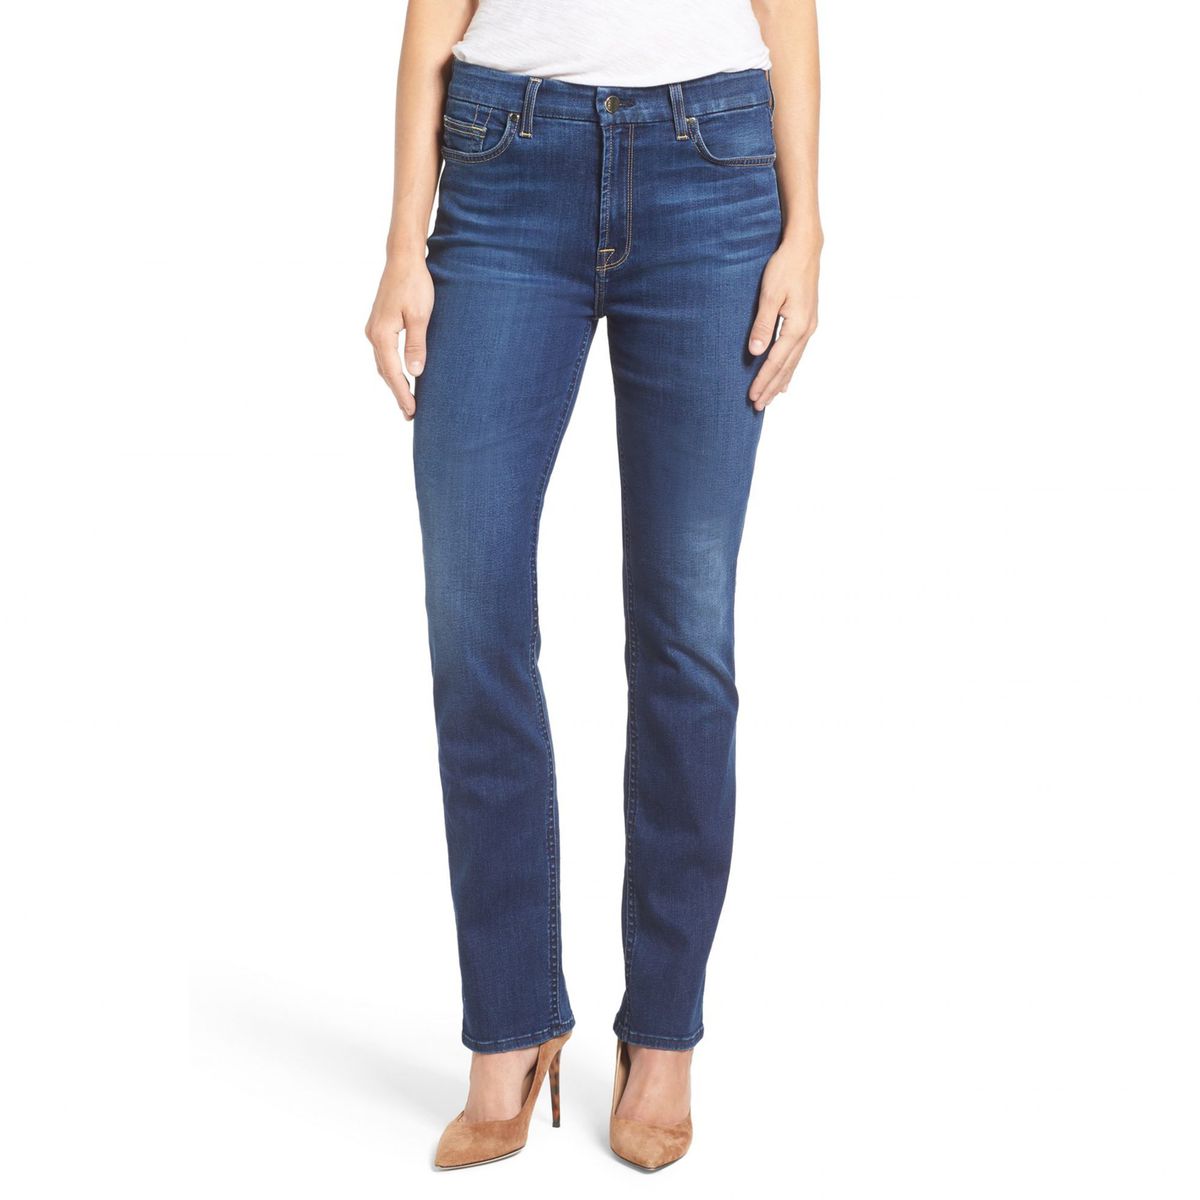 Brooke Shields Wore Jen7 by 7 For All Mankind Straight-Leg Jeans | InStyle